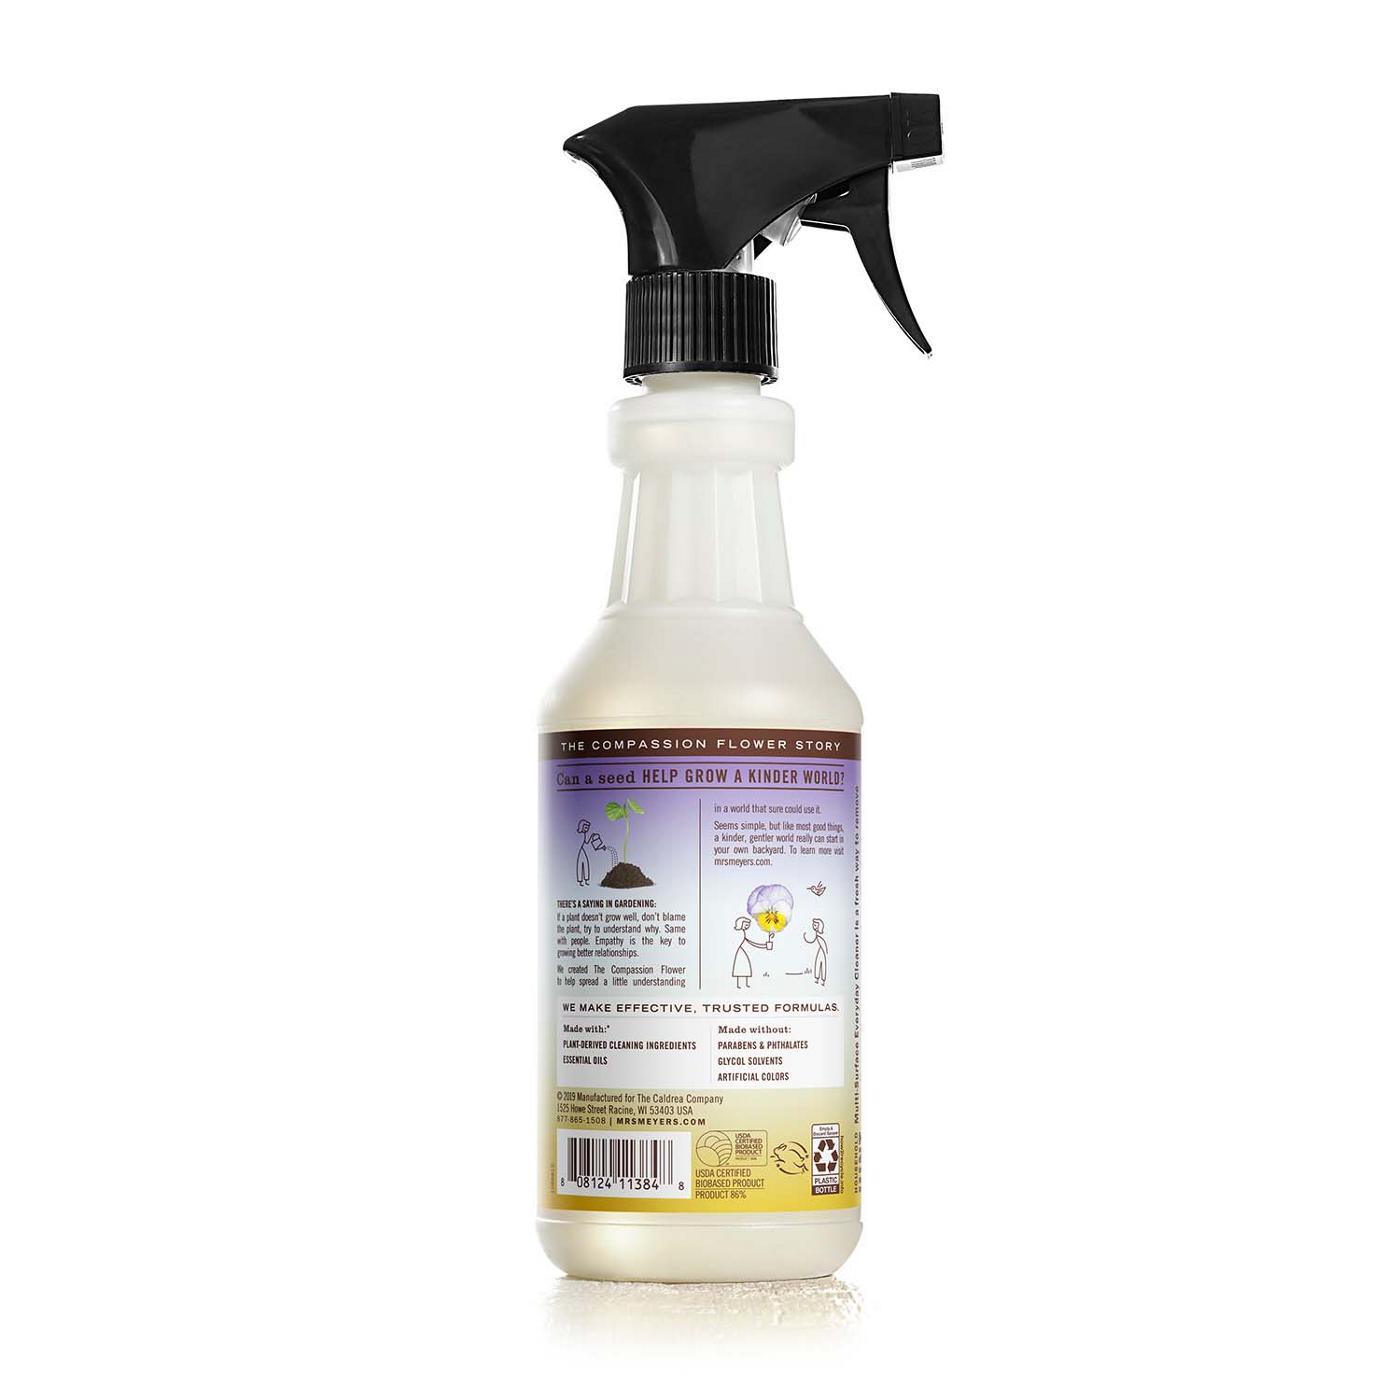 Mrs. Meyer's Clean Day Compassion Flower Multi-Surface Everyday Cleaner Spray; image 2 of 4